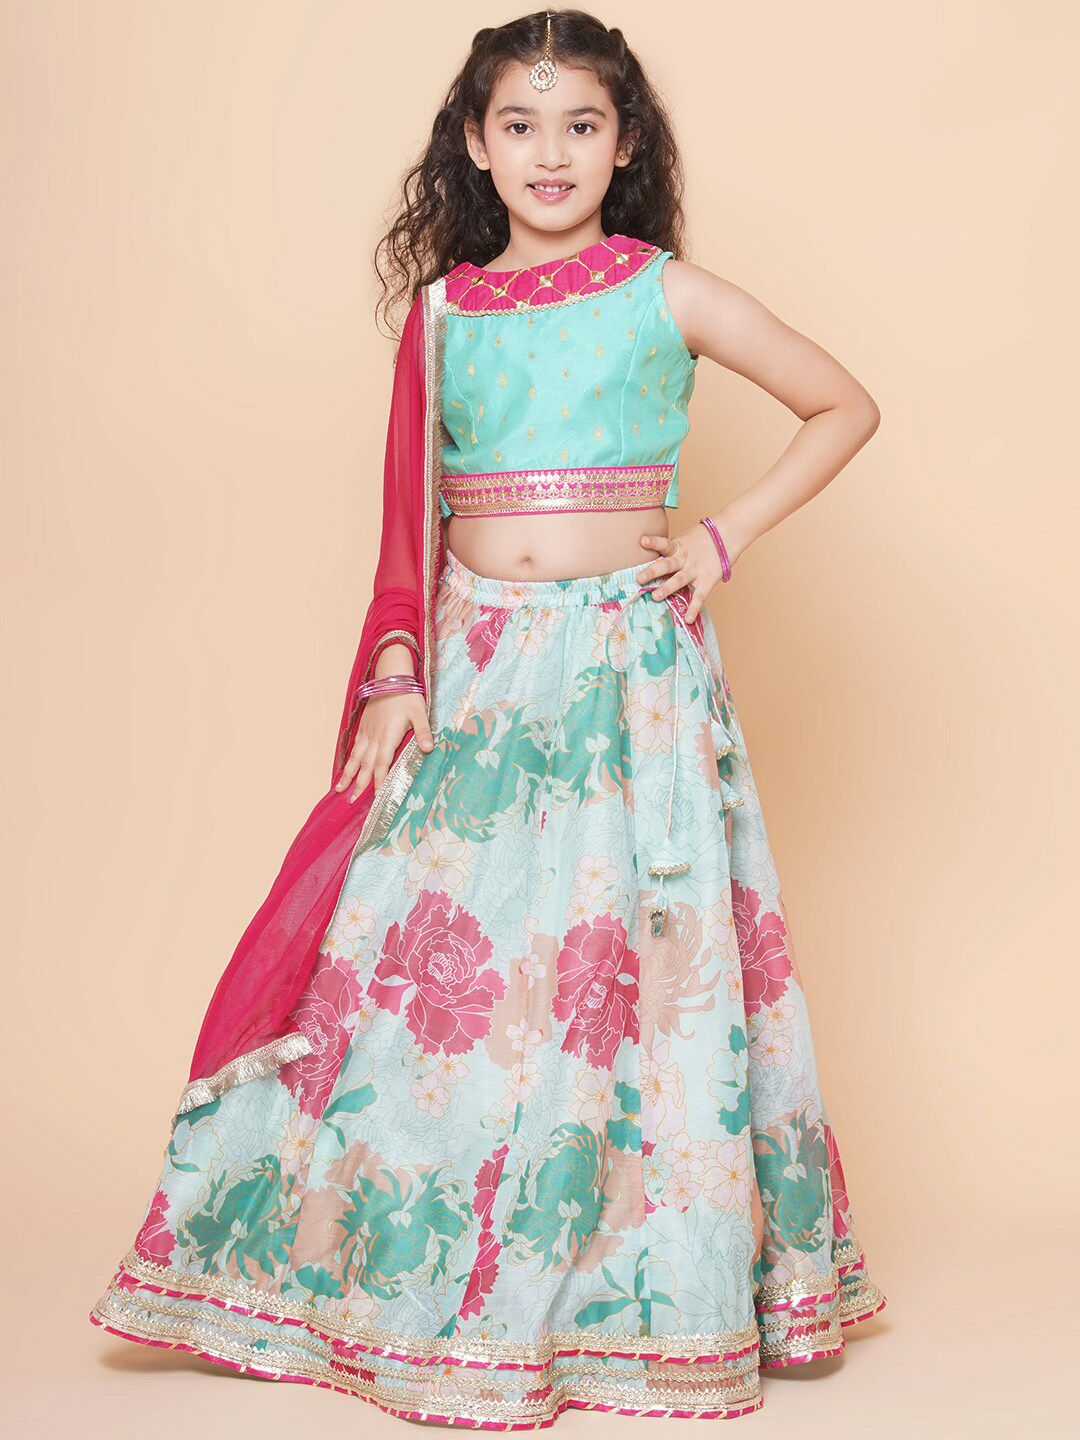 Bitiya by Bhama Girls Floral Printed Ready to Wear Lehenga & Blouse With Dupatta Price in India